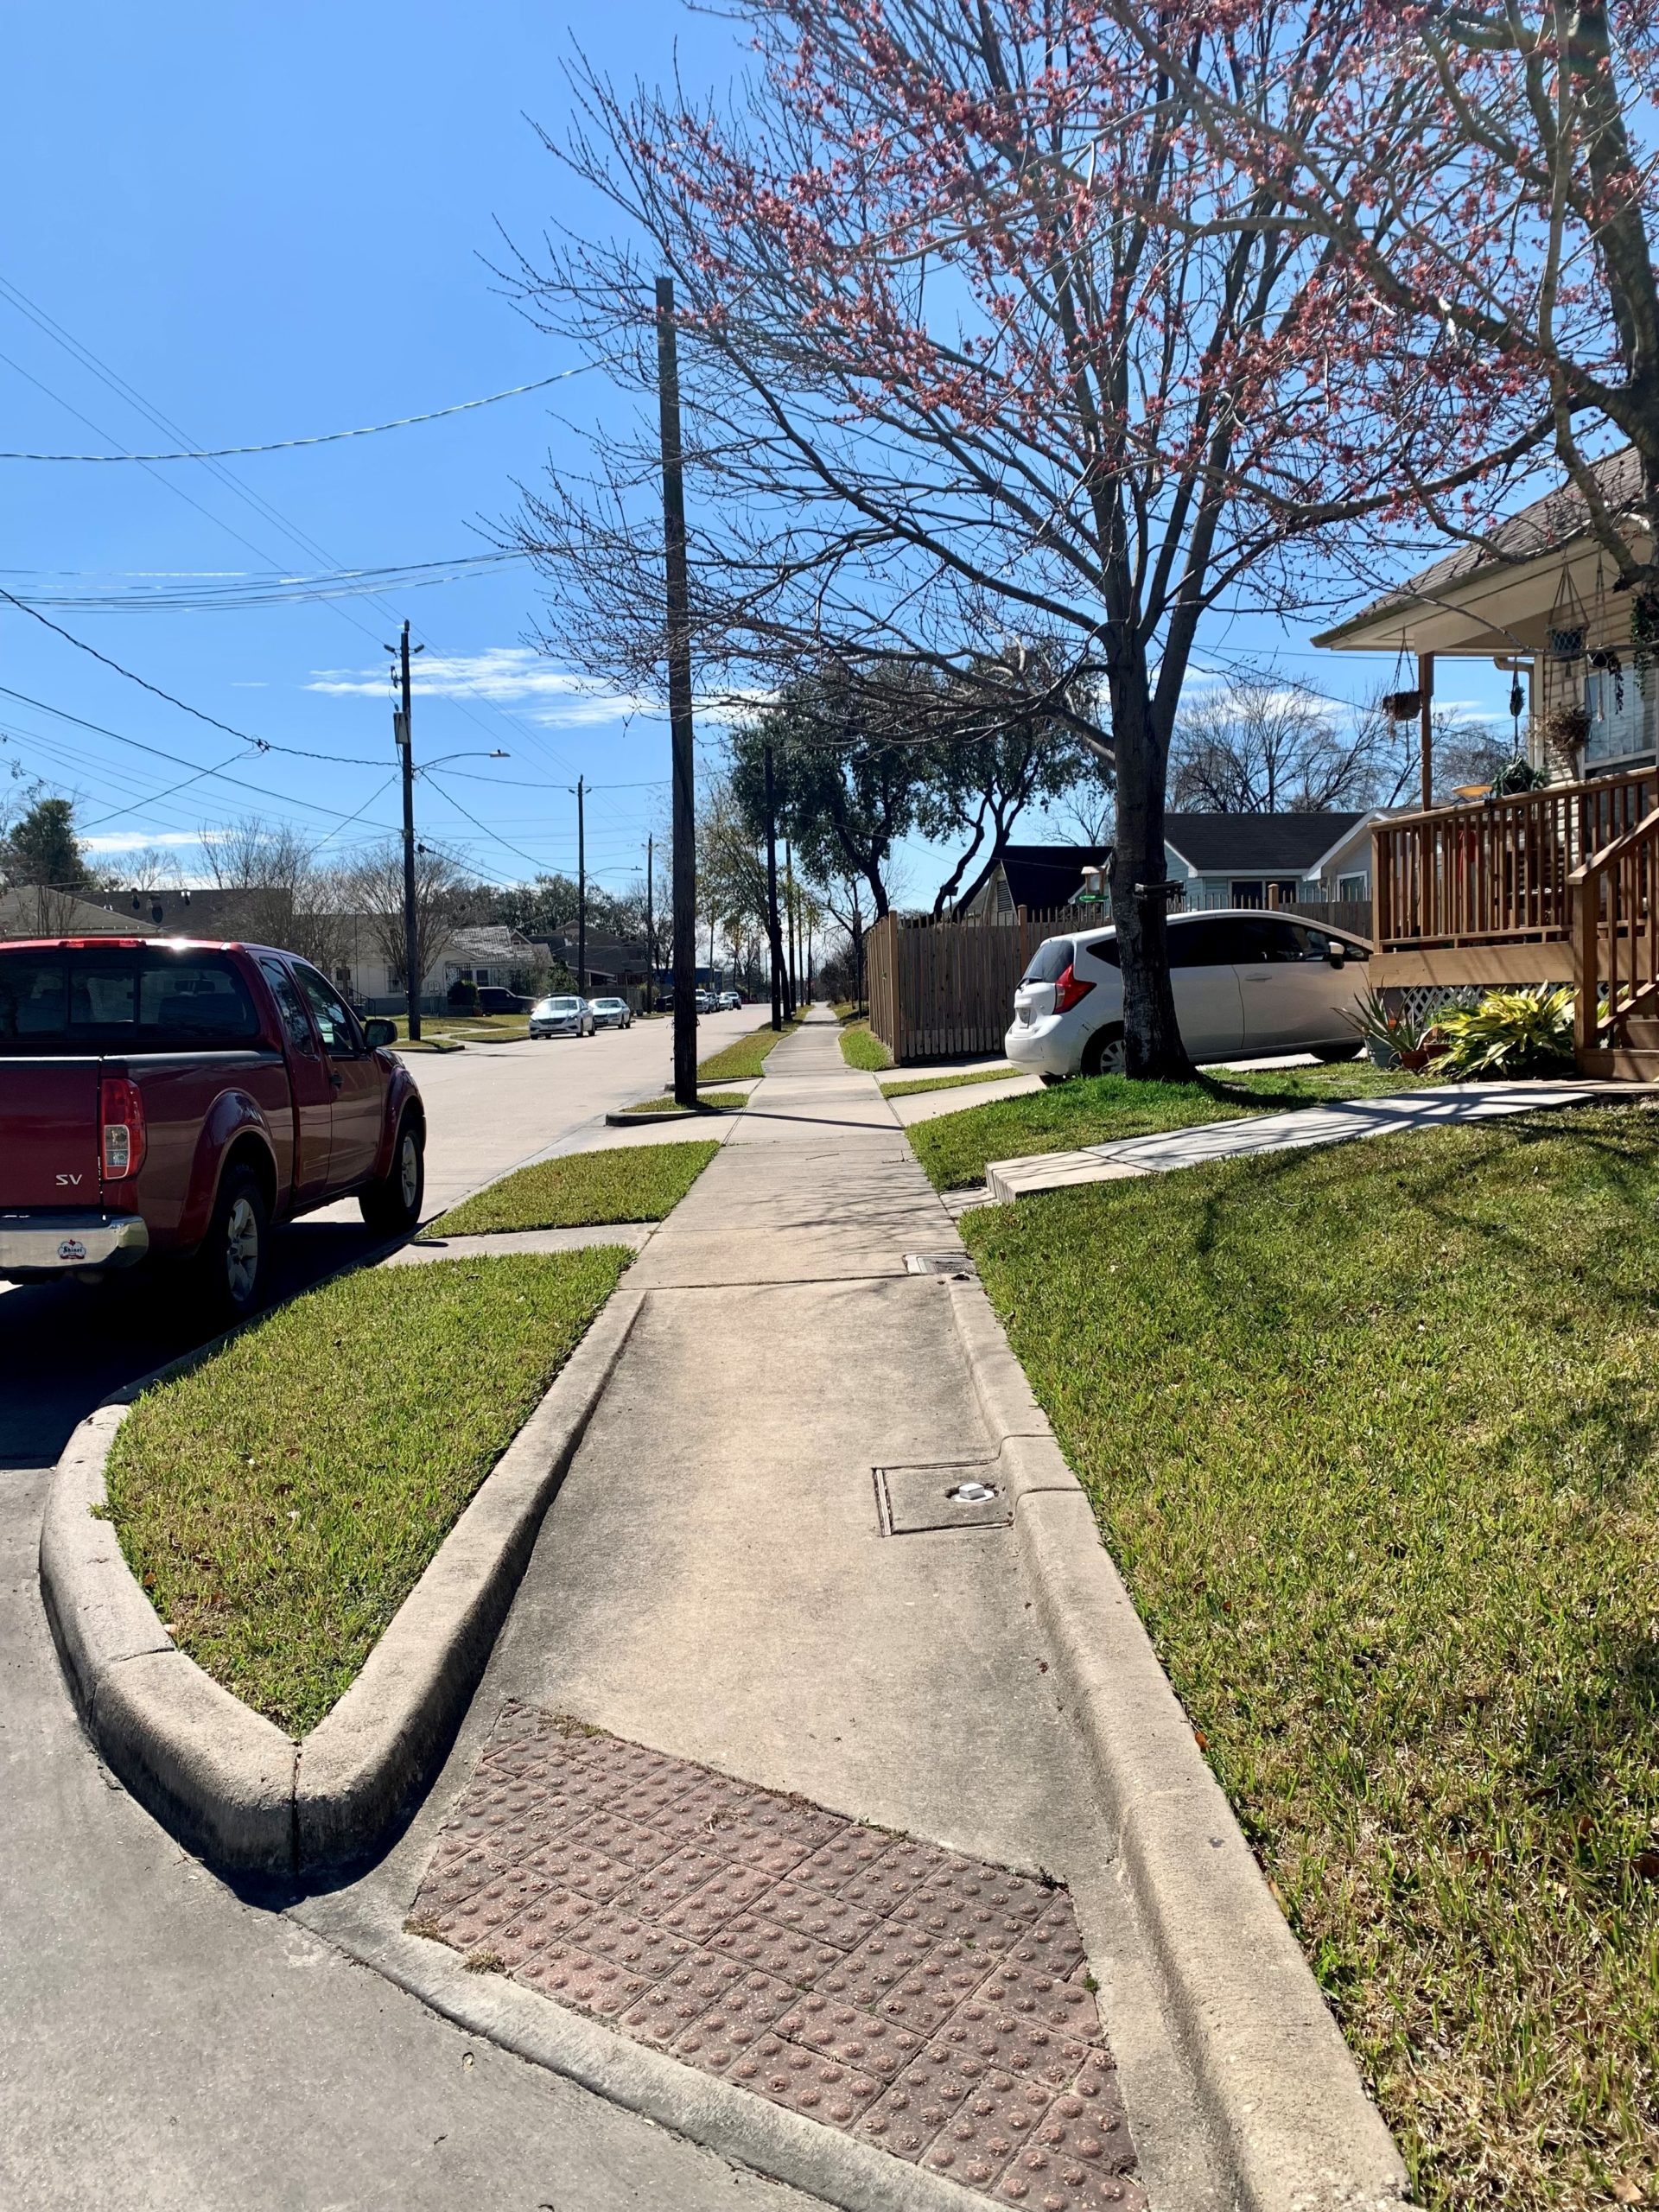 A safe, well connected, and accessible sidewalk in Second Ward. A red truck is parked on the street.